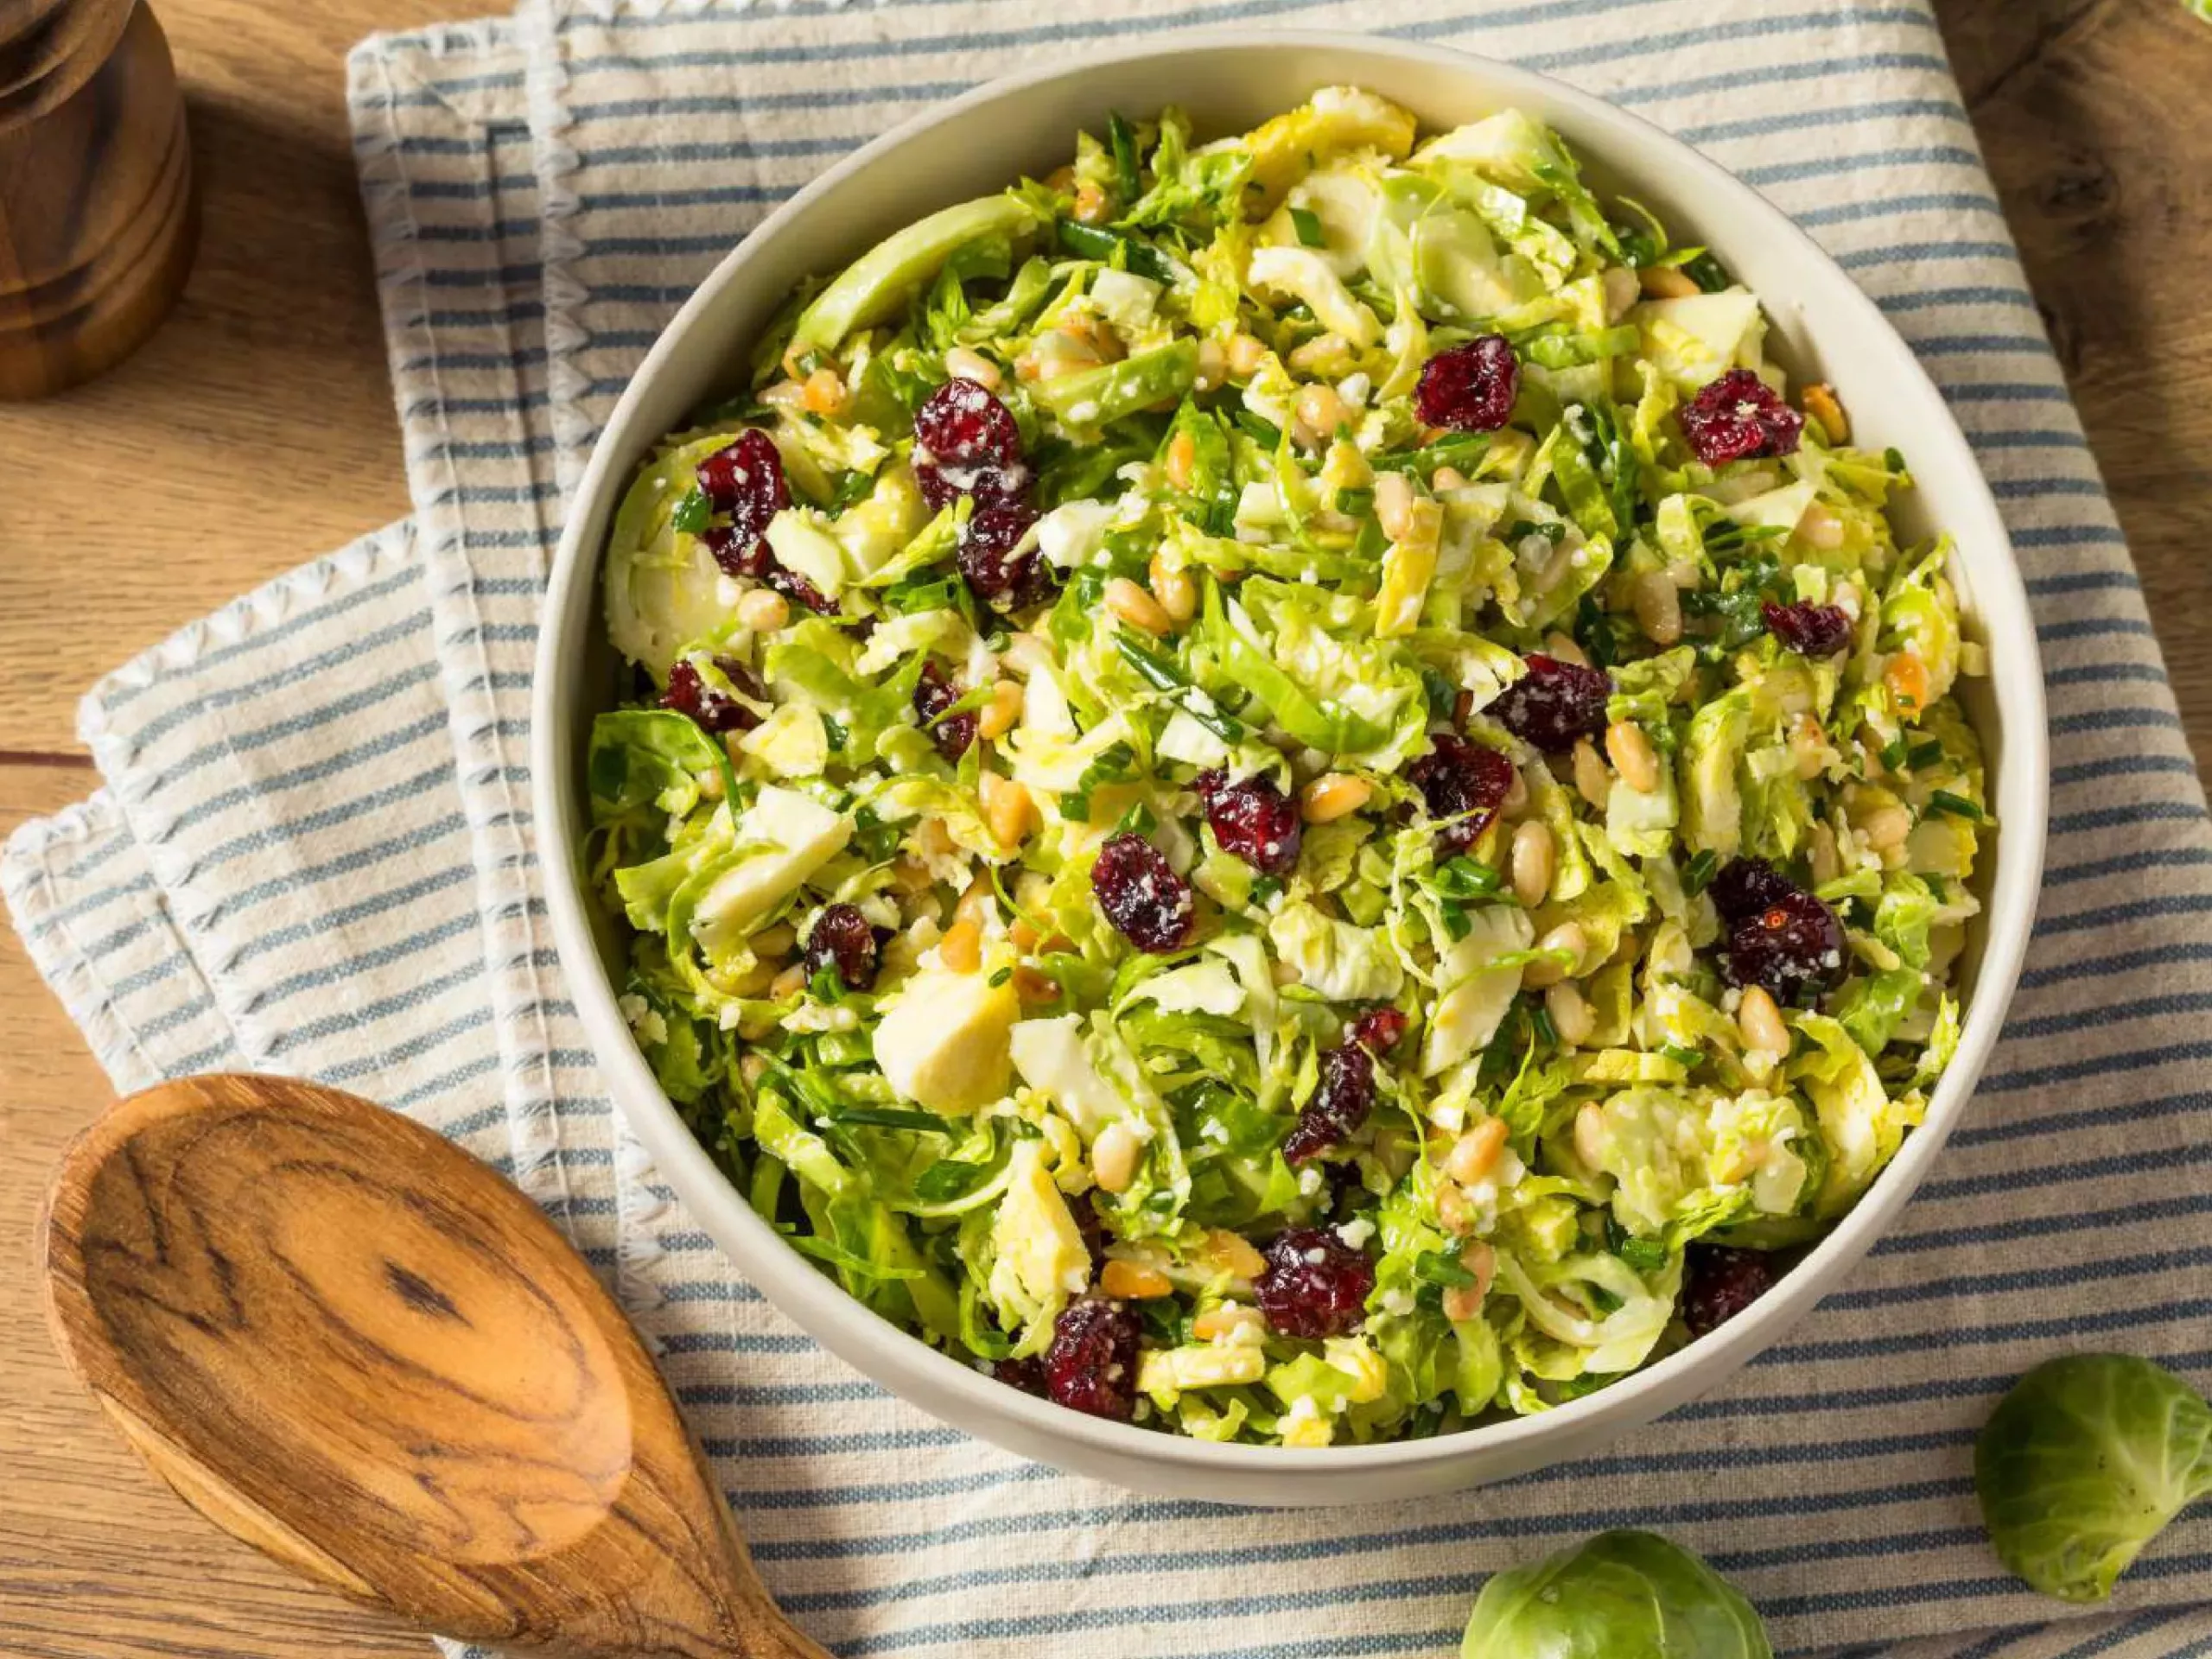 A shaved brussels sprouts salad with cranberries shown from above.